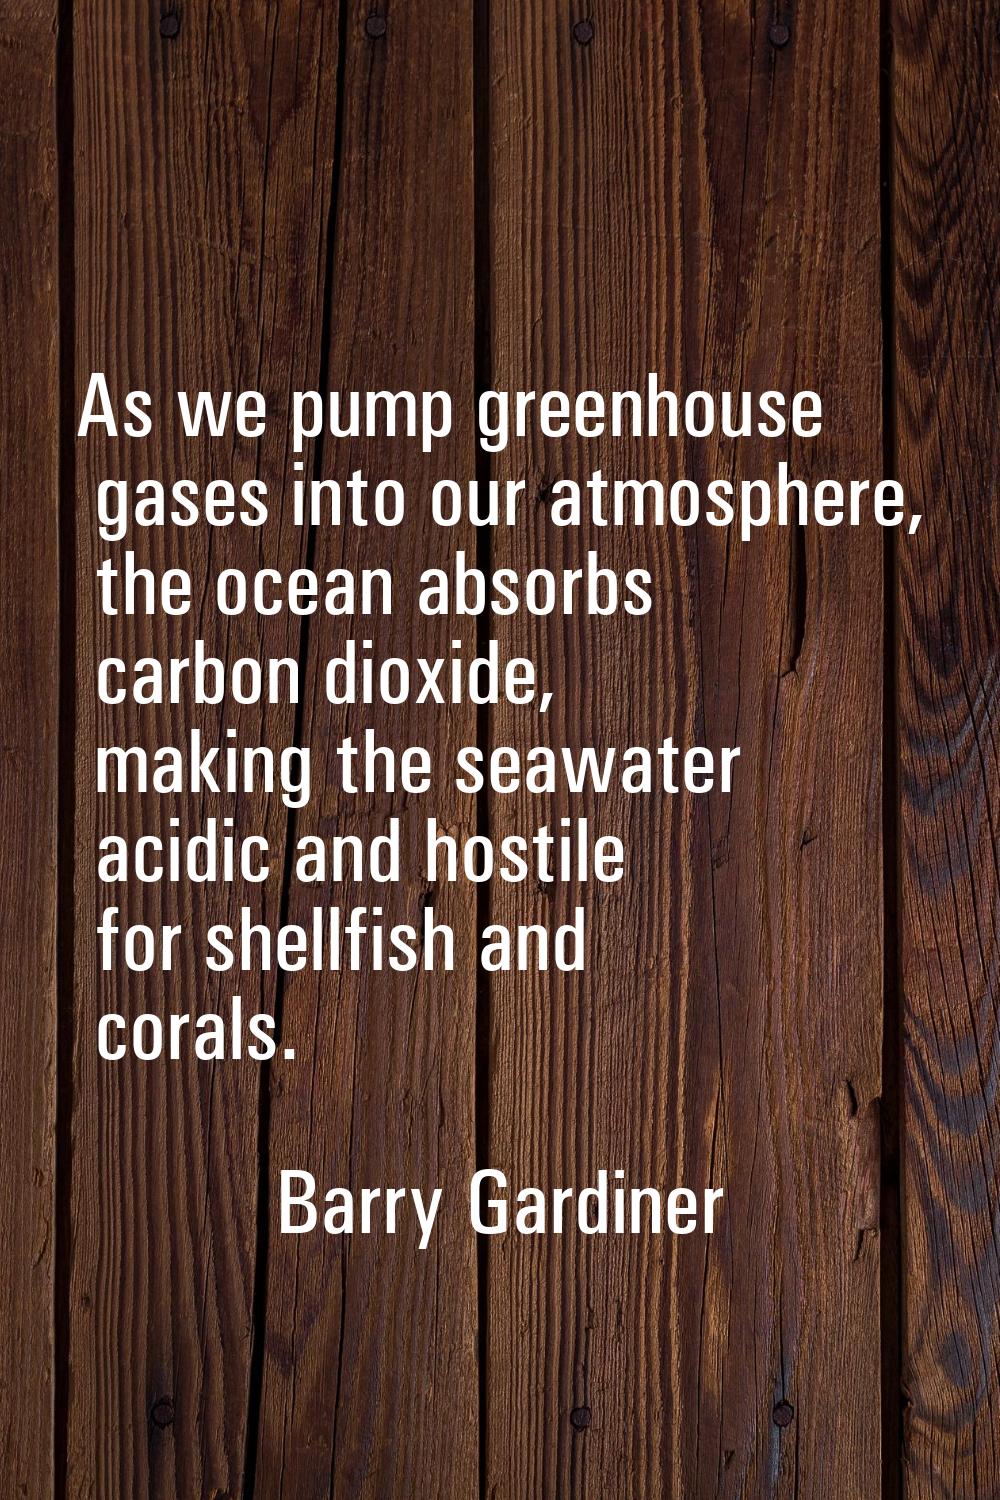 As we pump greenhouse gases into our atmosphere, the ocean absorbs carbon dioxide, making the seawa